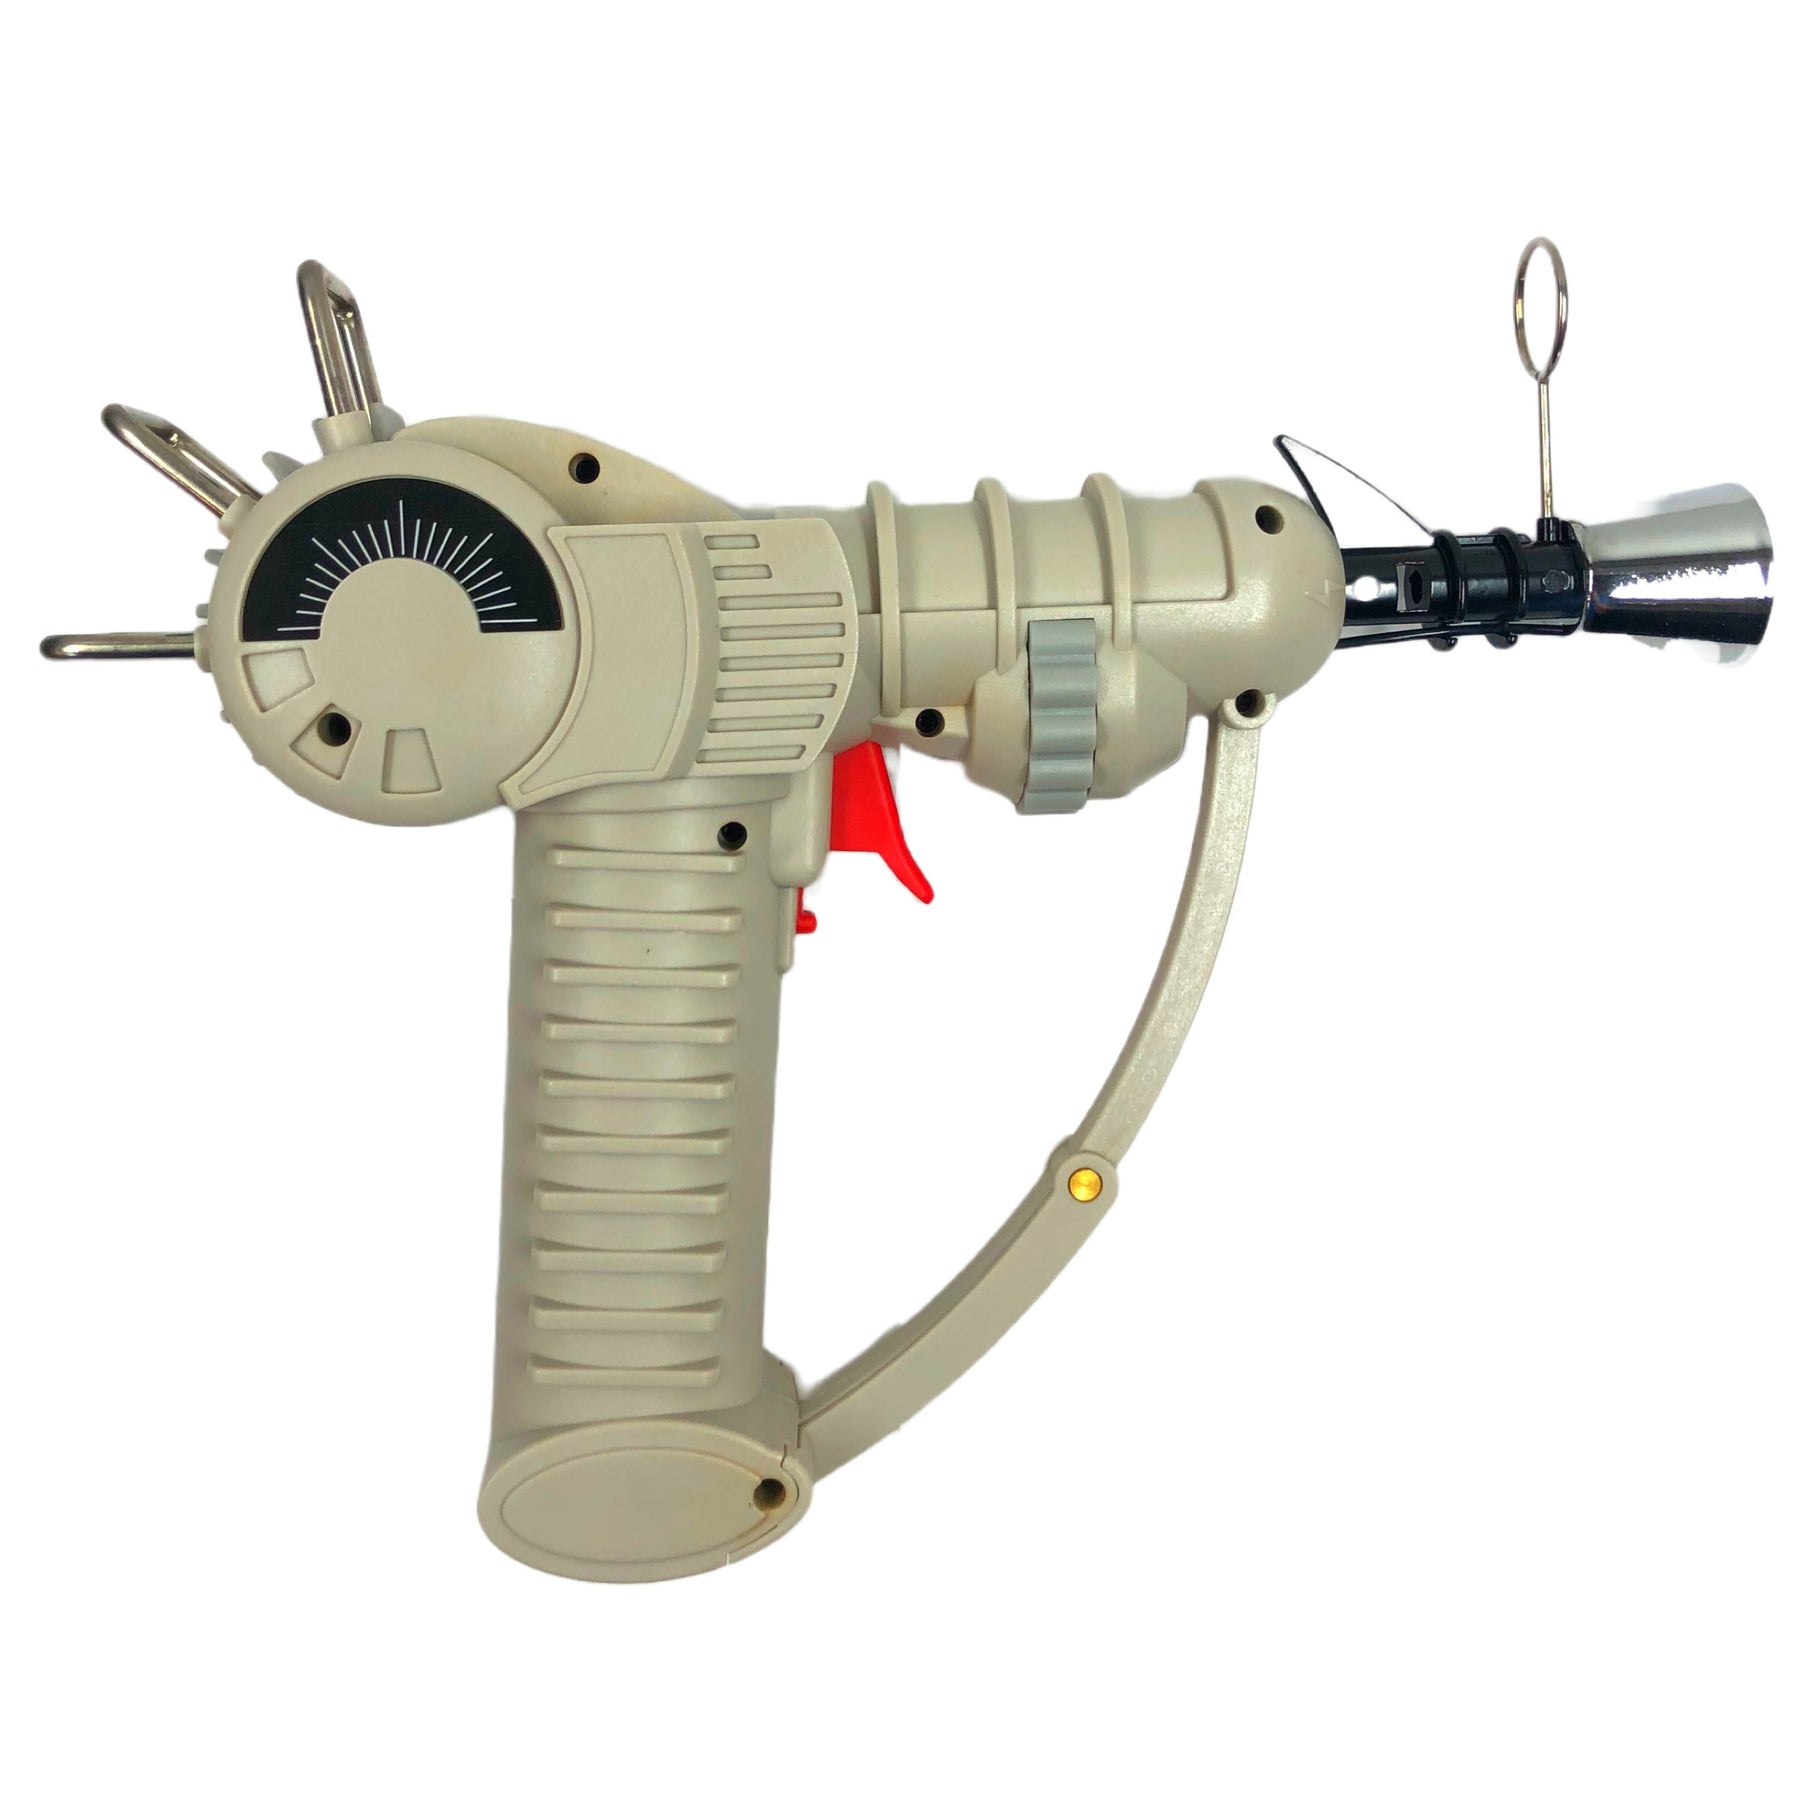 Ray Gun Torch For Weed